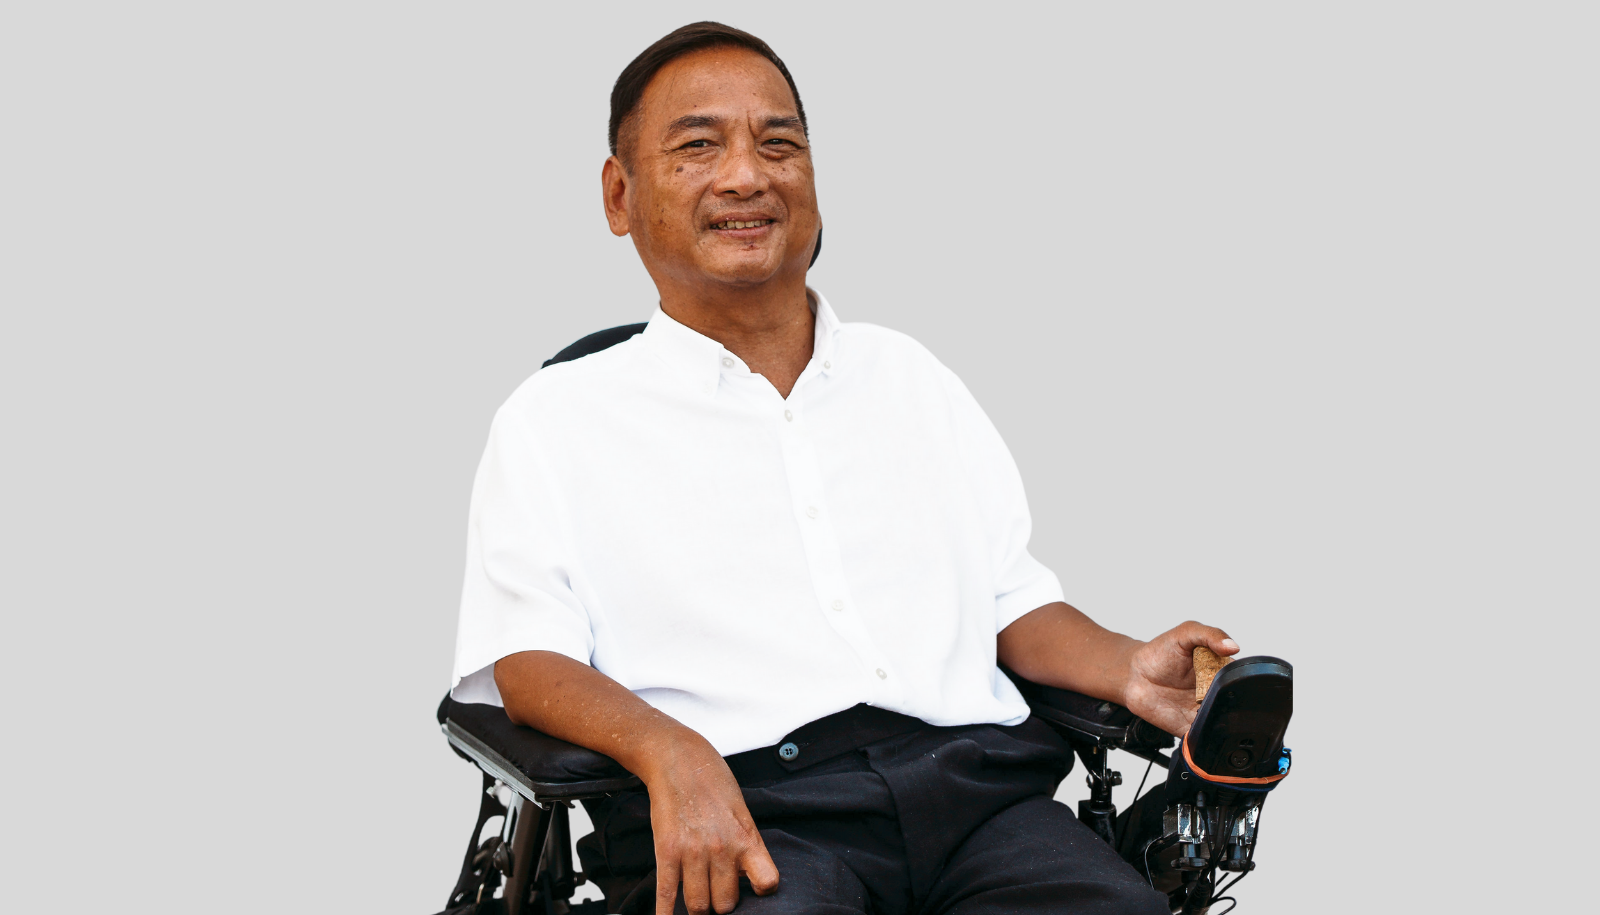 Jude Lee sitting in a wheelchair and smiling at the camera.